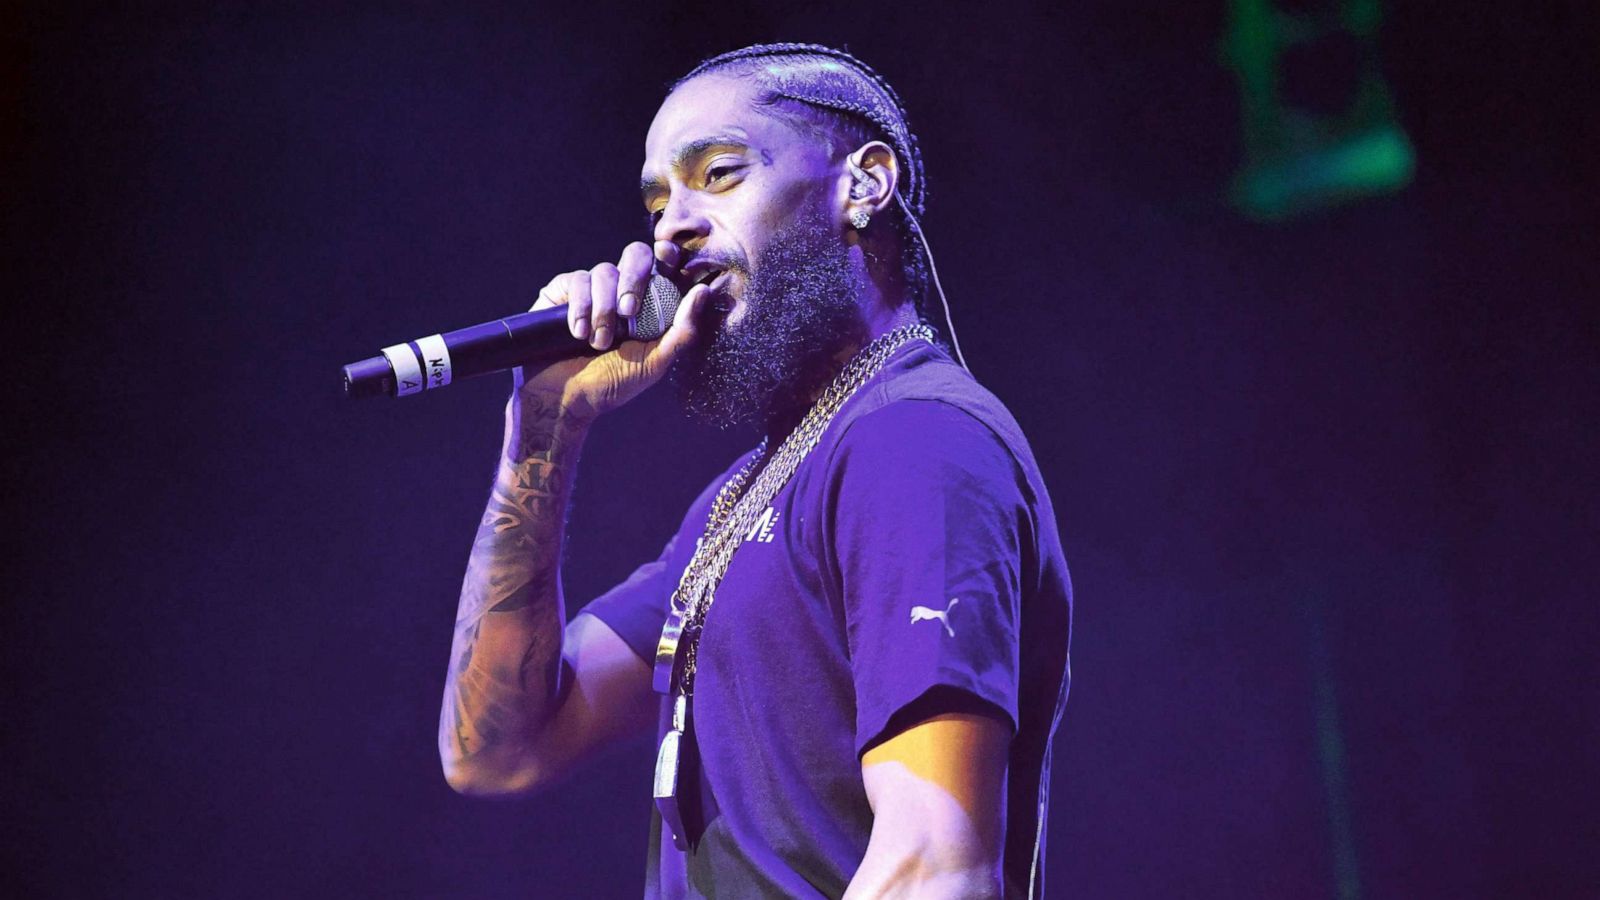 Steph Curry, Drake, Rihanna and more react to death of rapper Nipsey Hussle  - Good Morning America